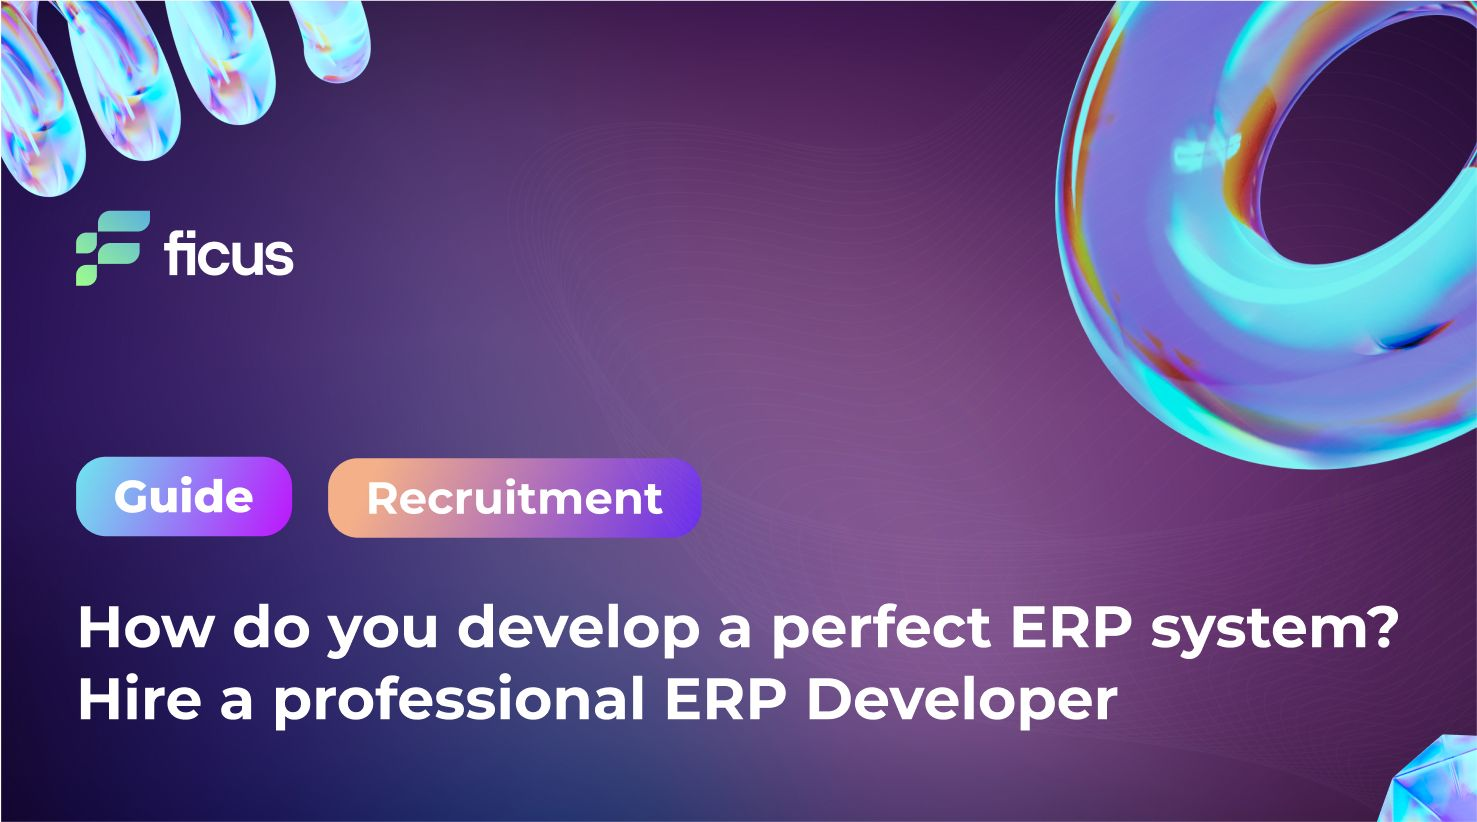 How do you develop a perfect ERP system? Hire a professional ERP Developer